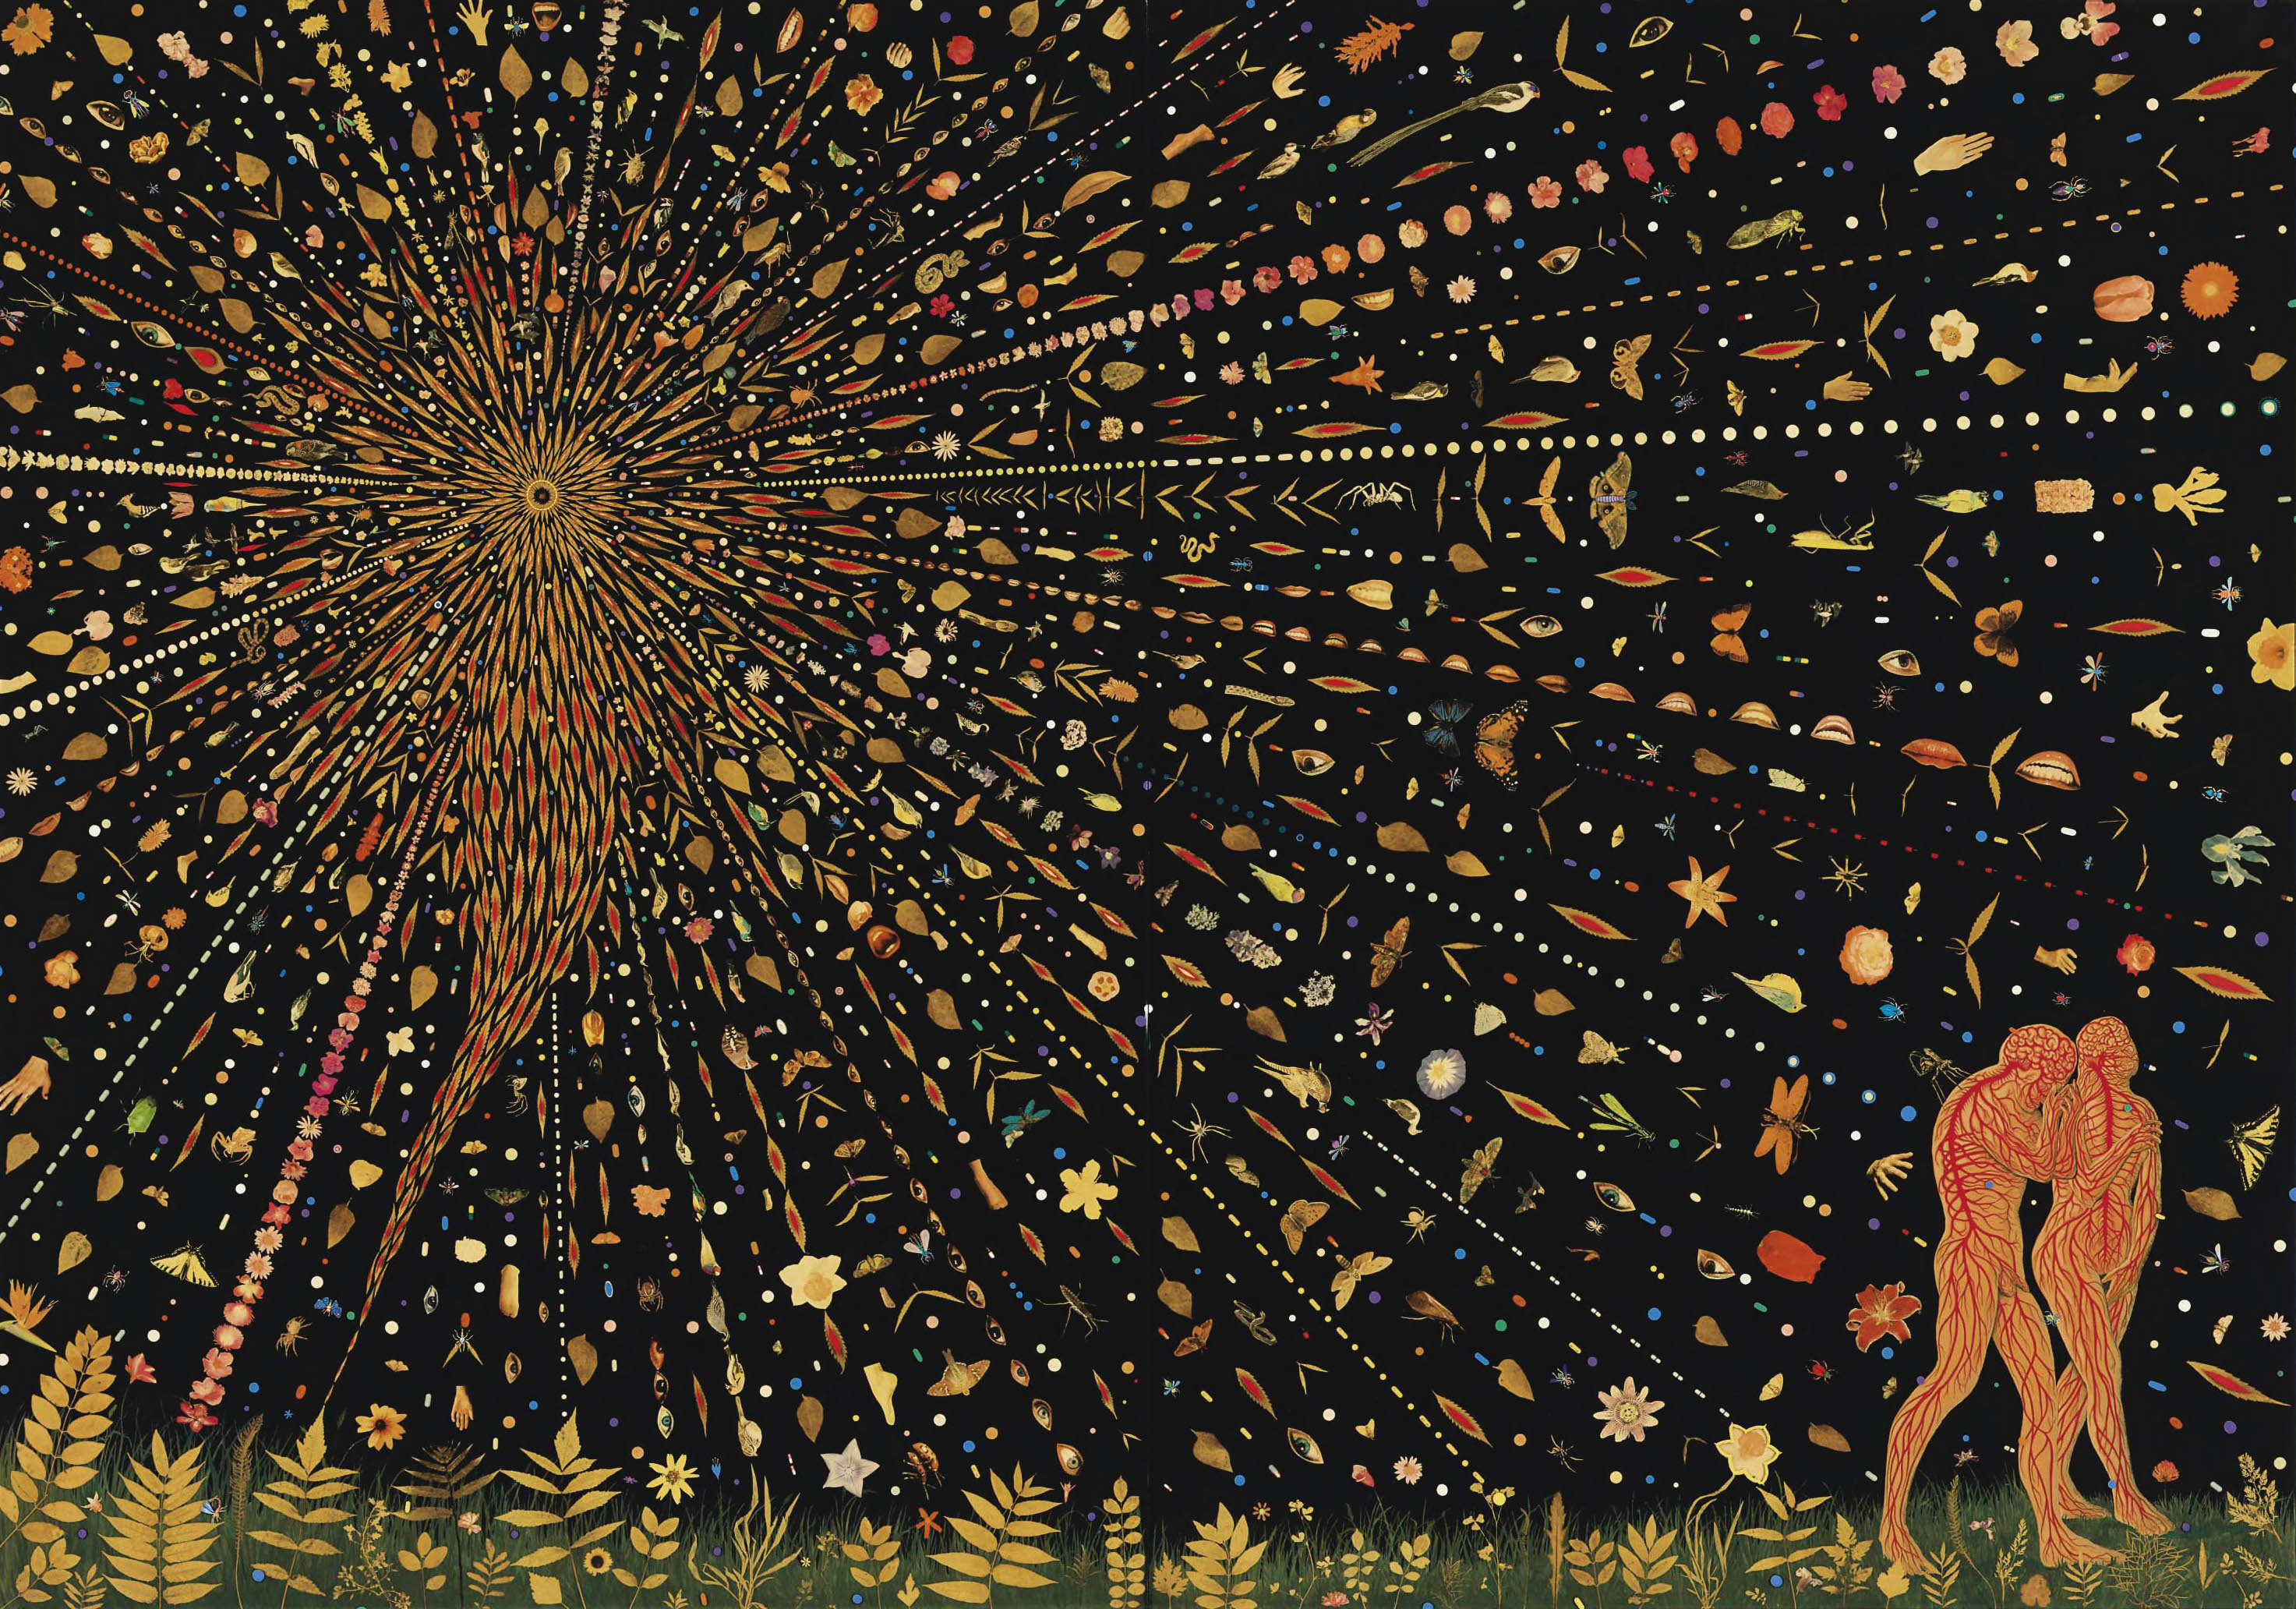 Fred Tomaselli's 'Untitled [Expulsion]'